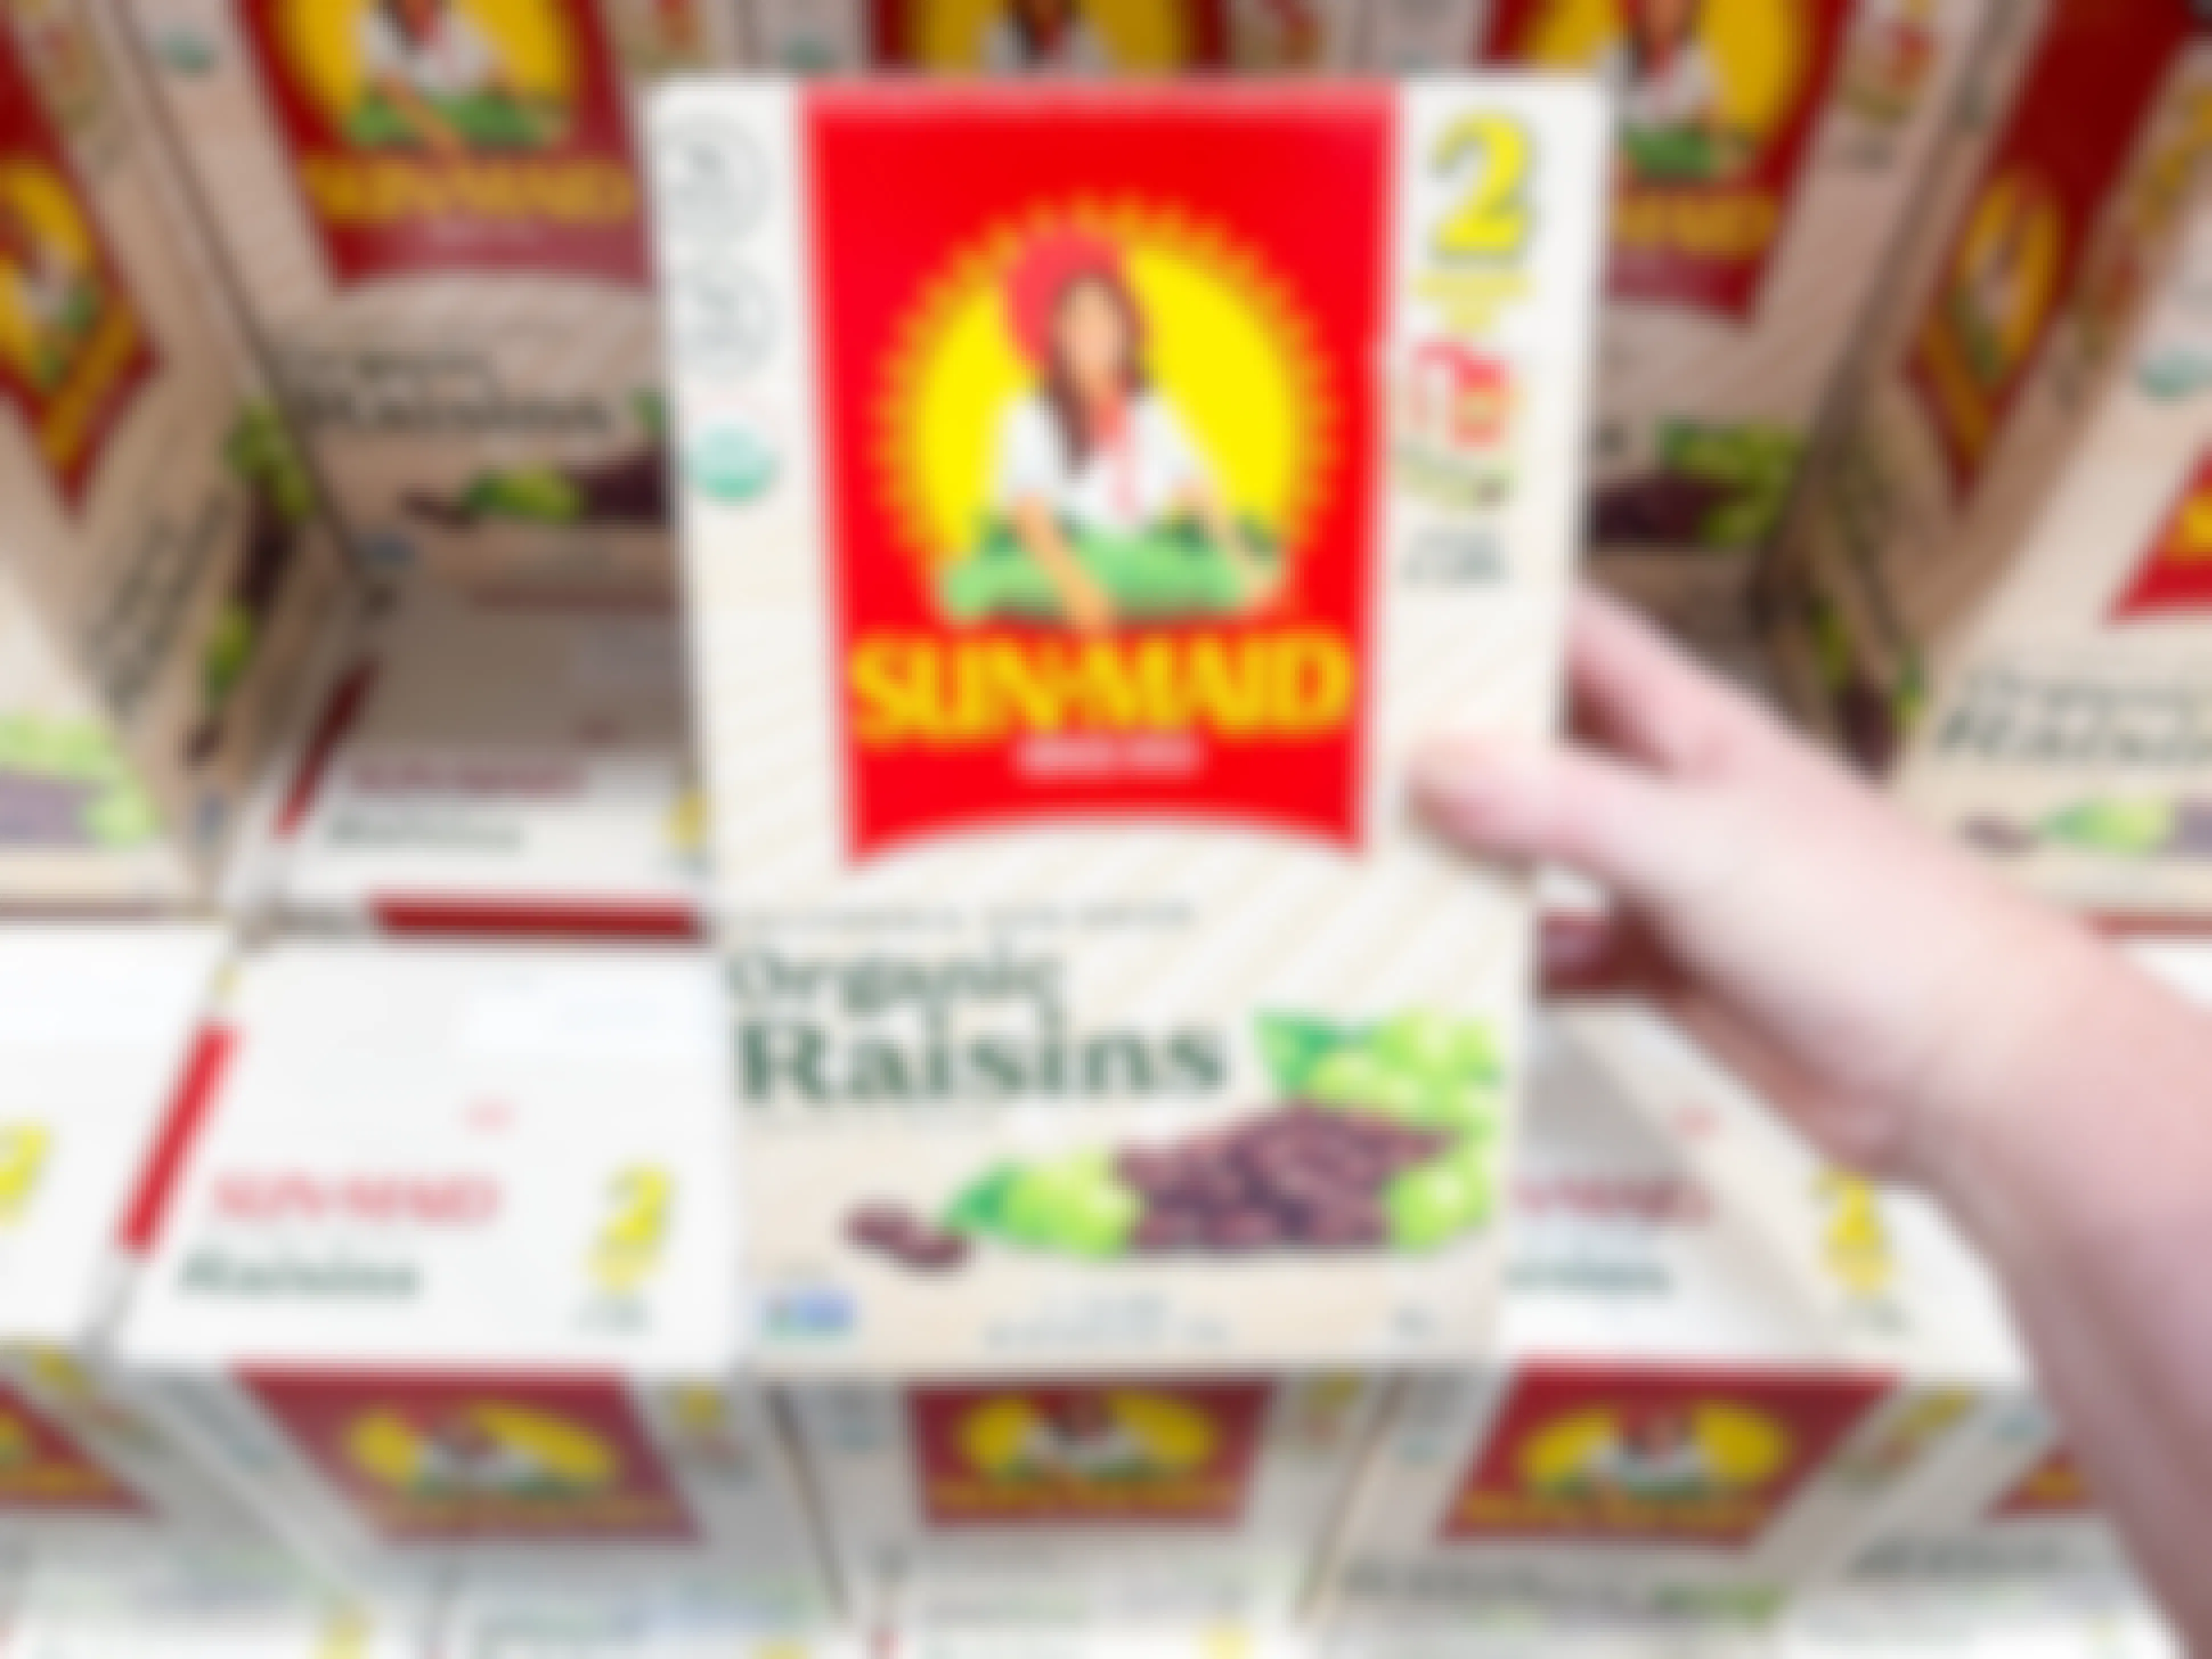 a box of raisins being held in store